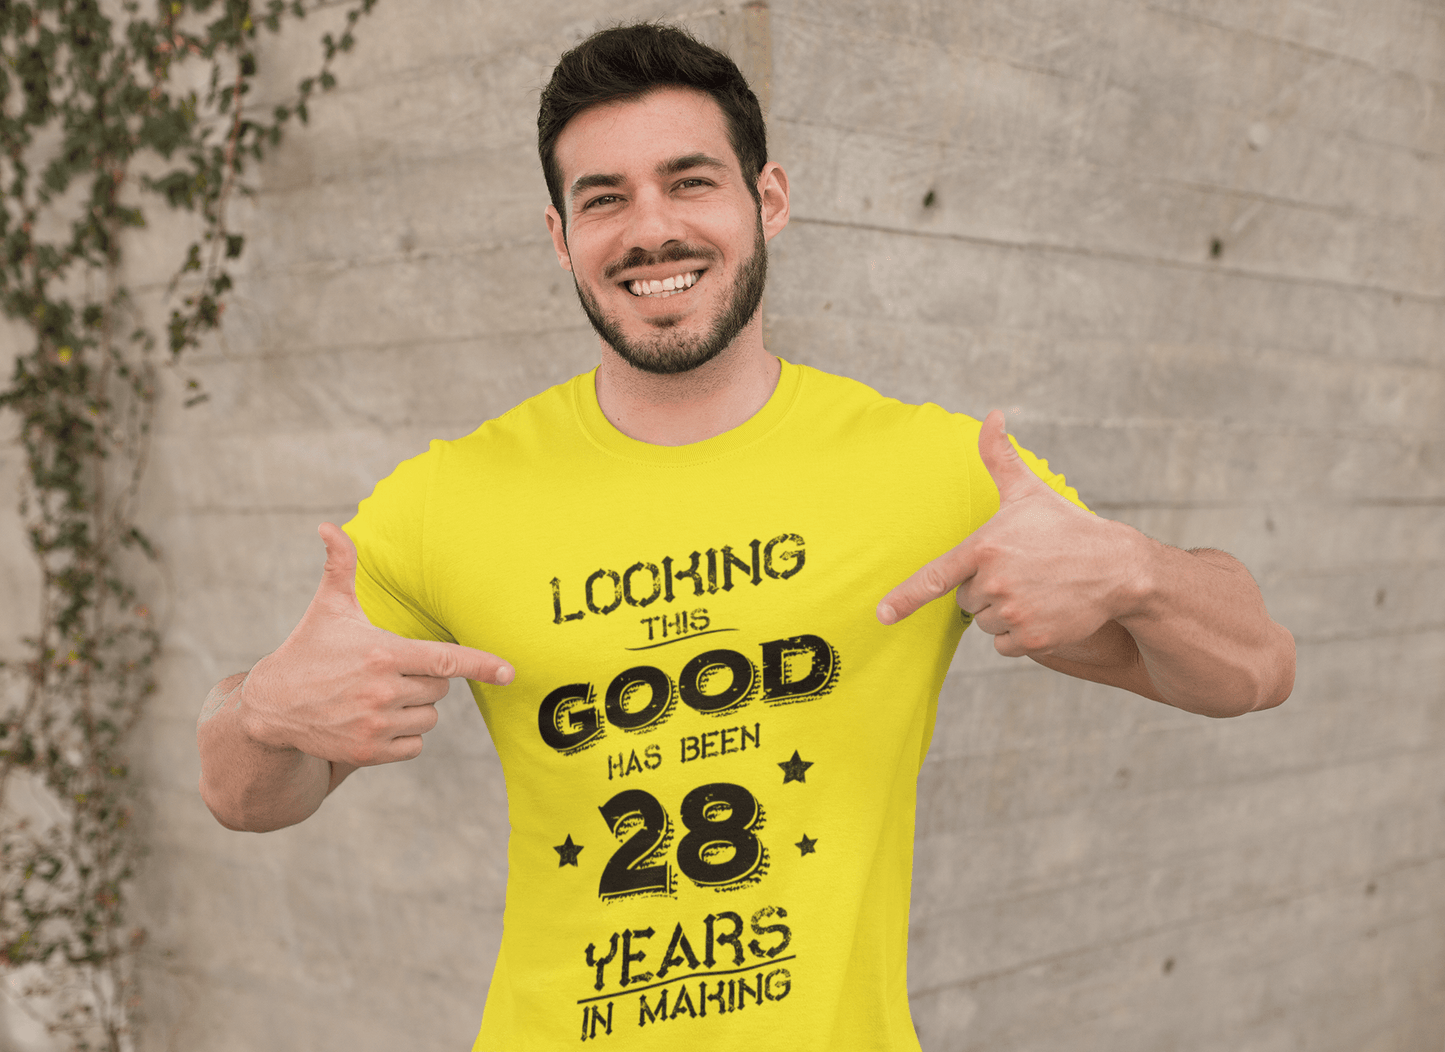 Looking This Good has been 28 Years in Making Men's T-shirt Lemon Birthday Gift Round Neck 00442